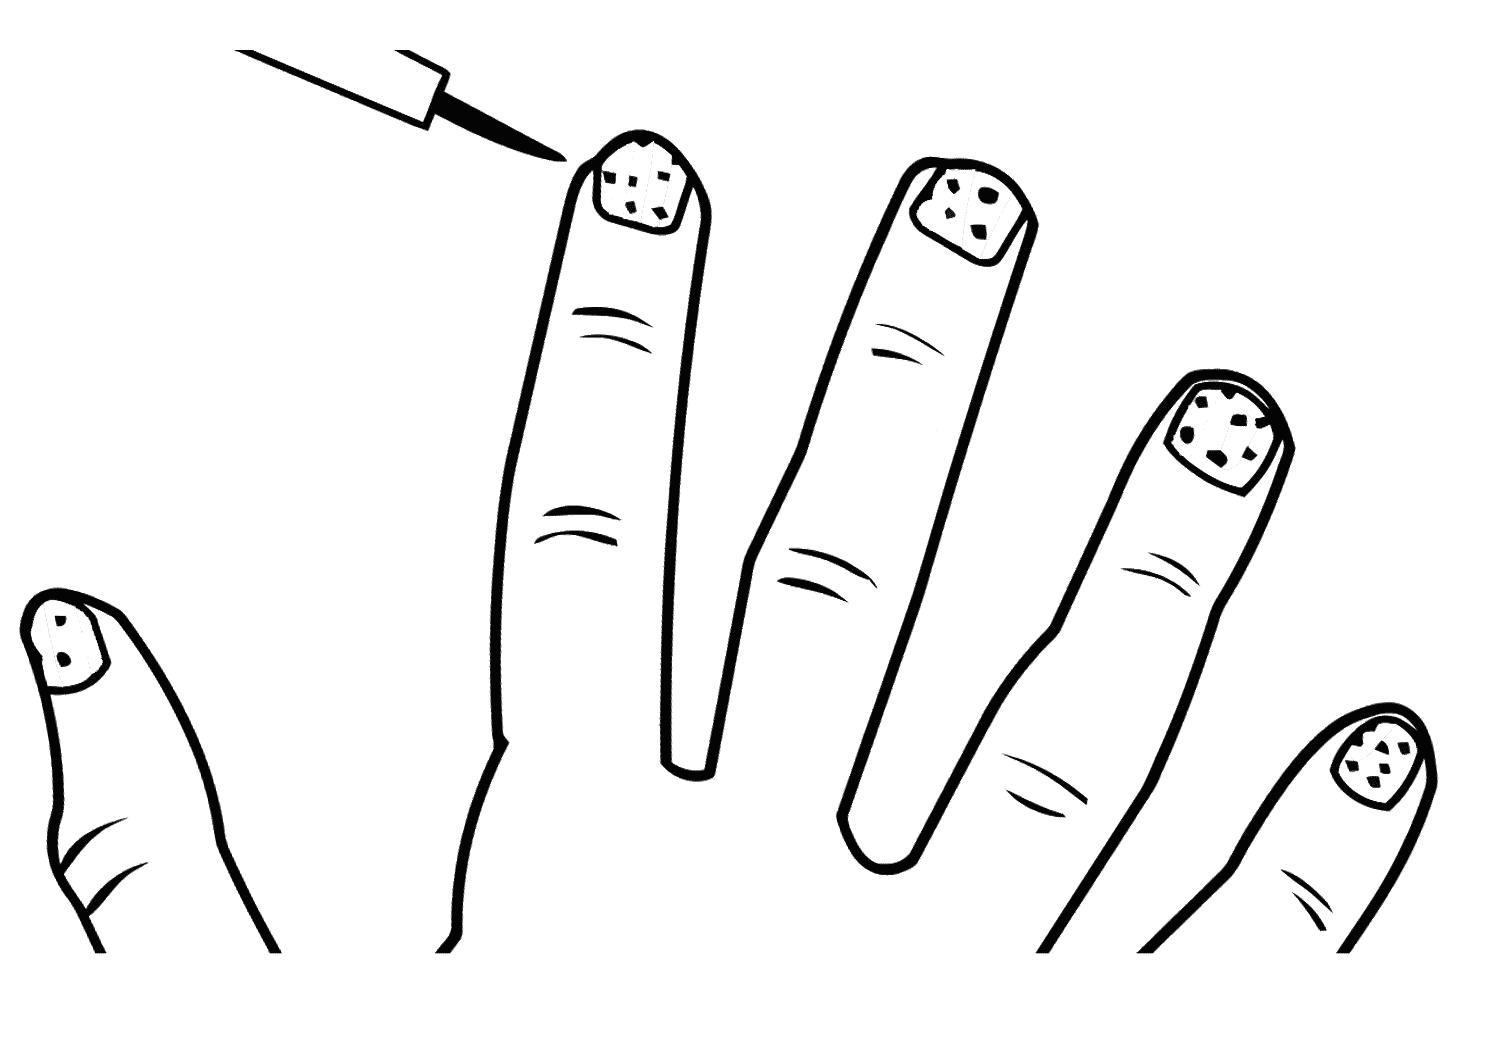 Nails coloring pages | Coloring pages to download and print